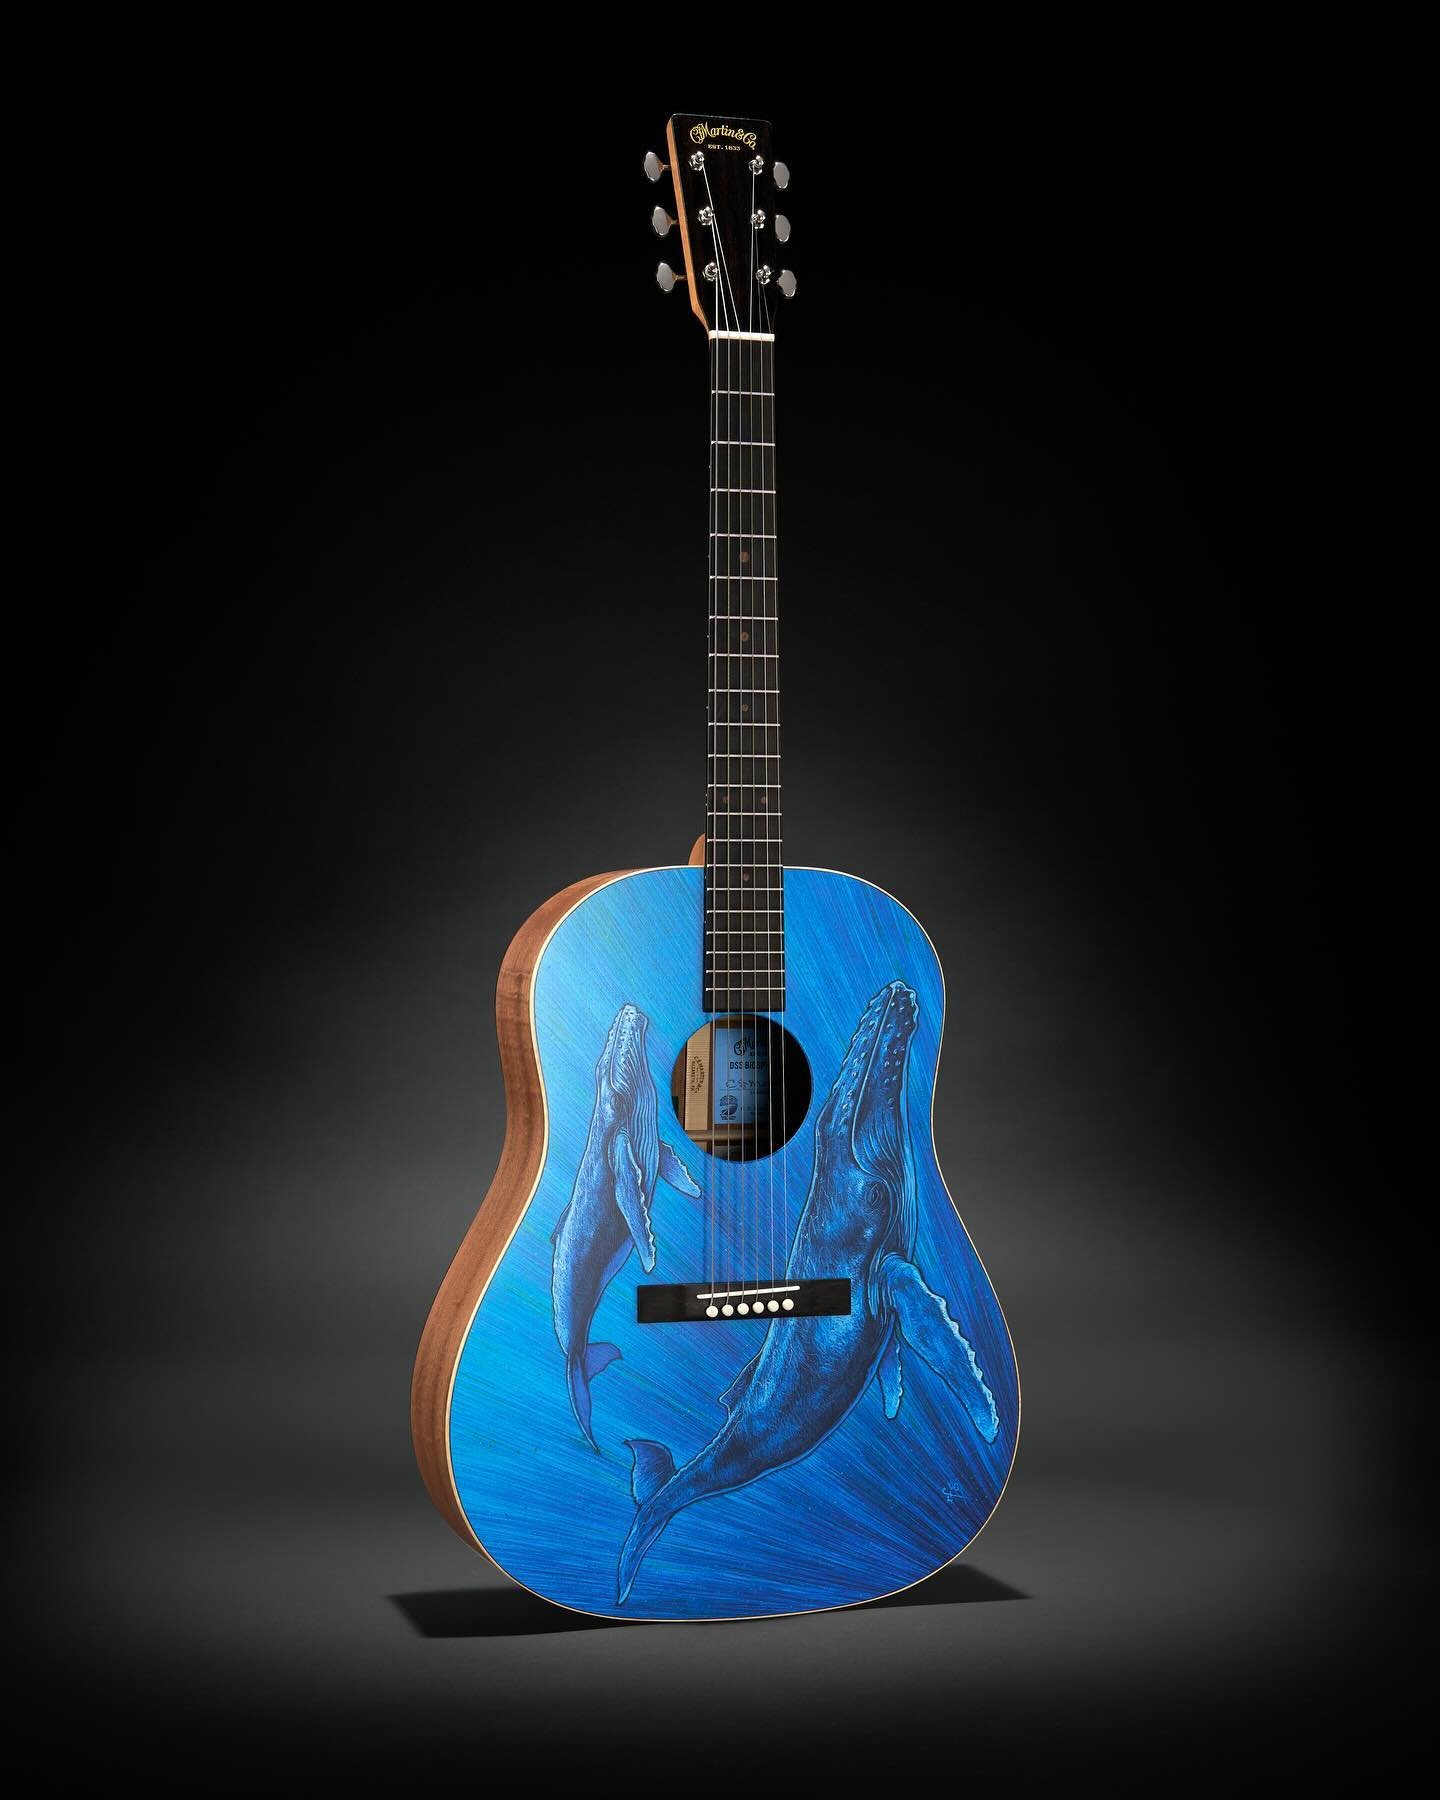 Introducing the @martinguitar DSS Biosphere II! 🐋
&nbsp;
The third model in their Earth Day series showcases another stunning work of art from acclaimed artist Robert Goetzl, taking us to the waters off the coast of Hawaii. This model is a tribute t